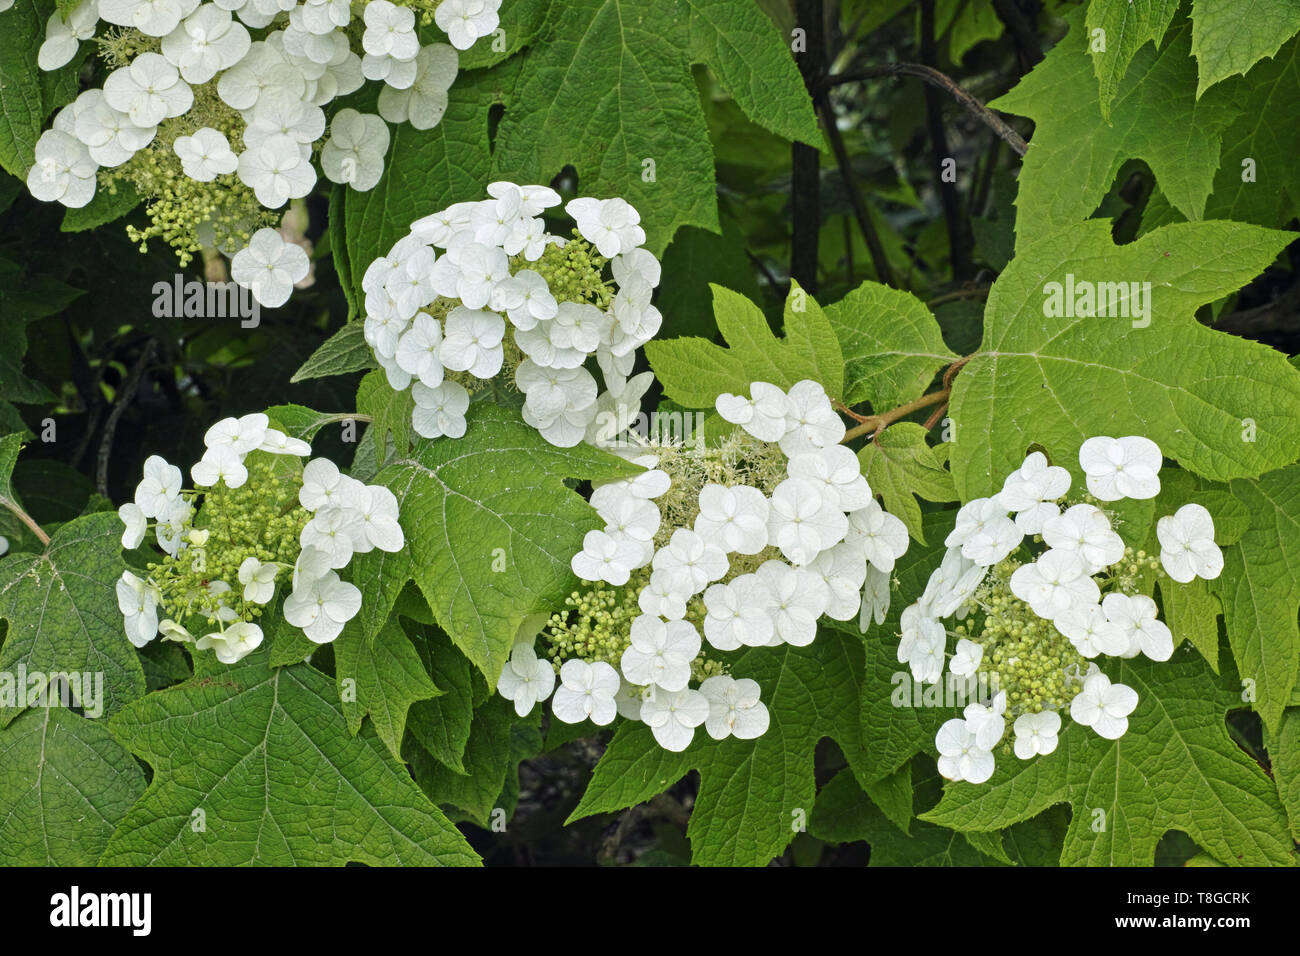 panicles in blooming and foliage of oakleaf hydrangea Stock Photo